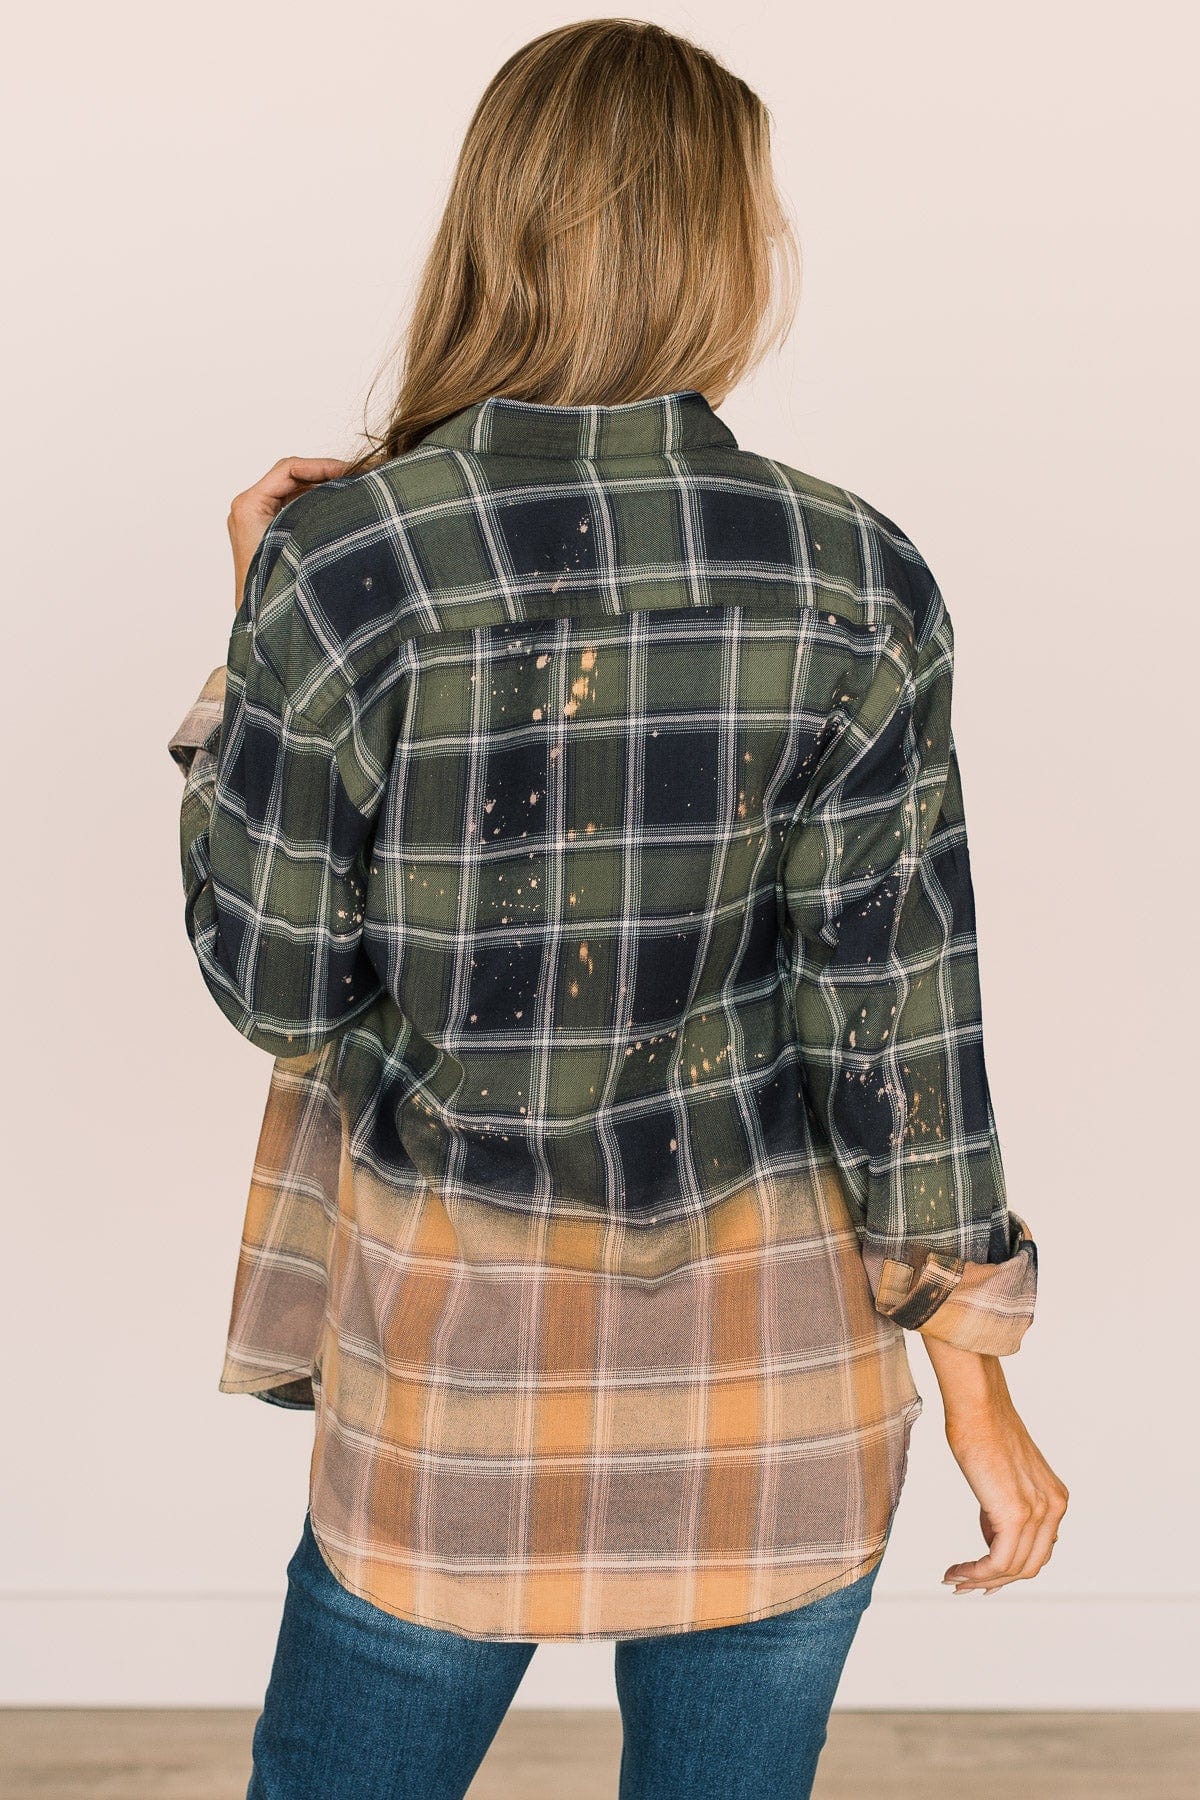 Enjoying This Moment Bleached Plaid Top- Green & Navy